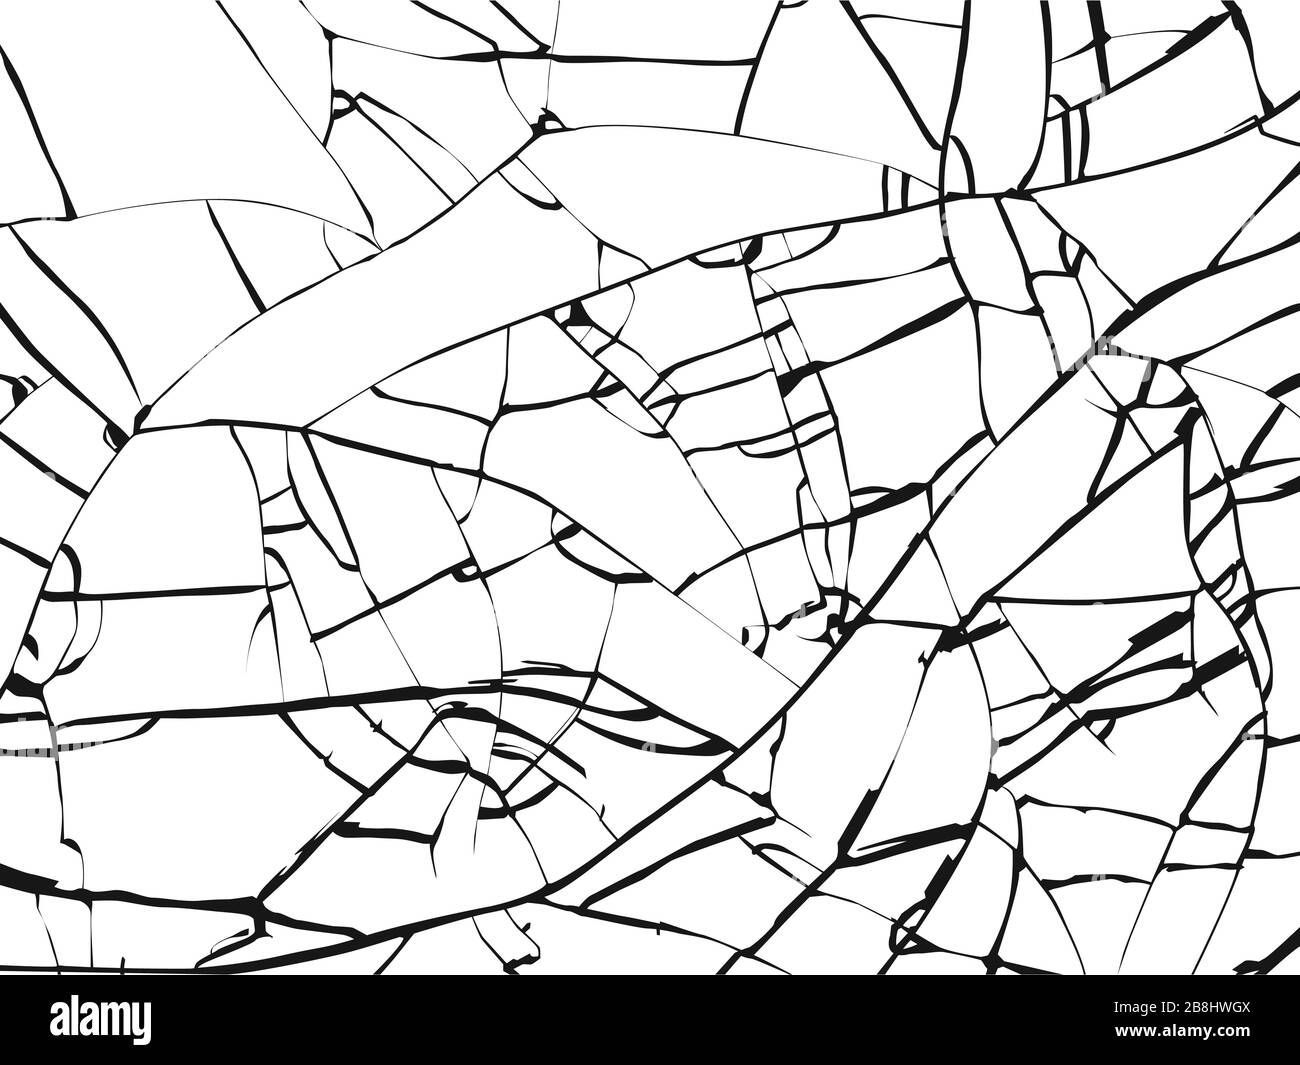 Surface of broken glass texture. Sketch shattered or crushed glass effect. Vector illustration isolated on white baclground Stock Vector